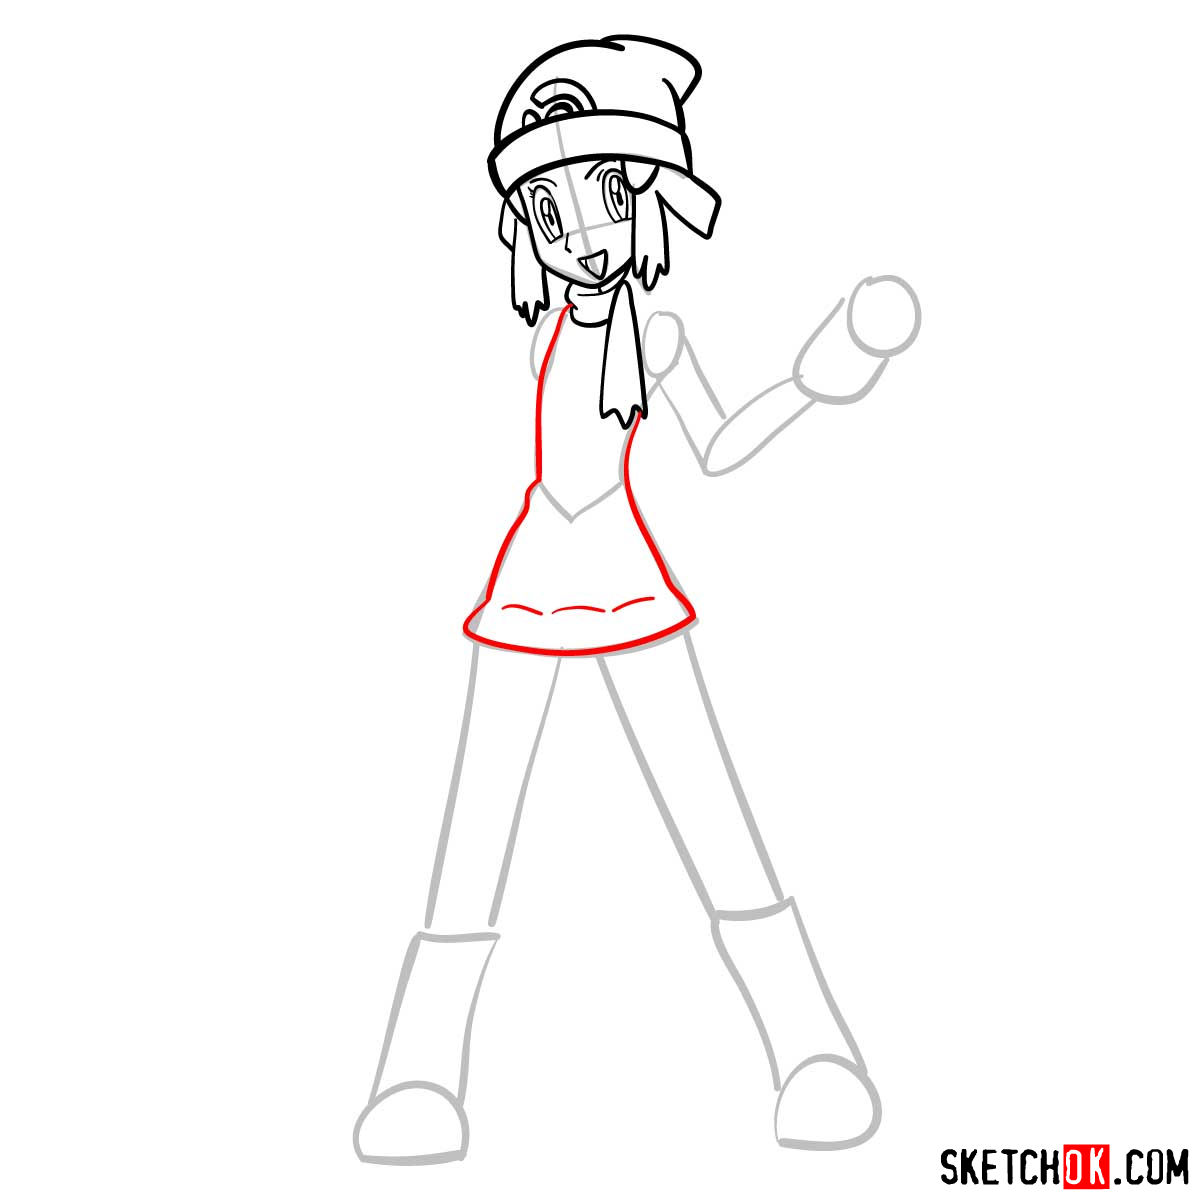 How to draw Dawn from Pokemon anime - step 08